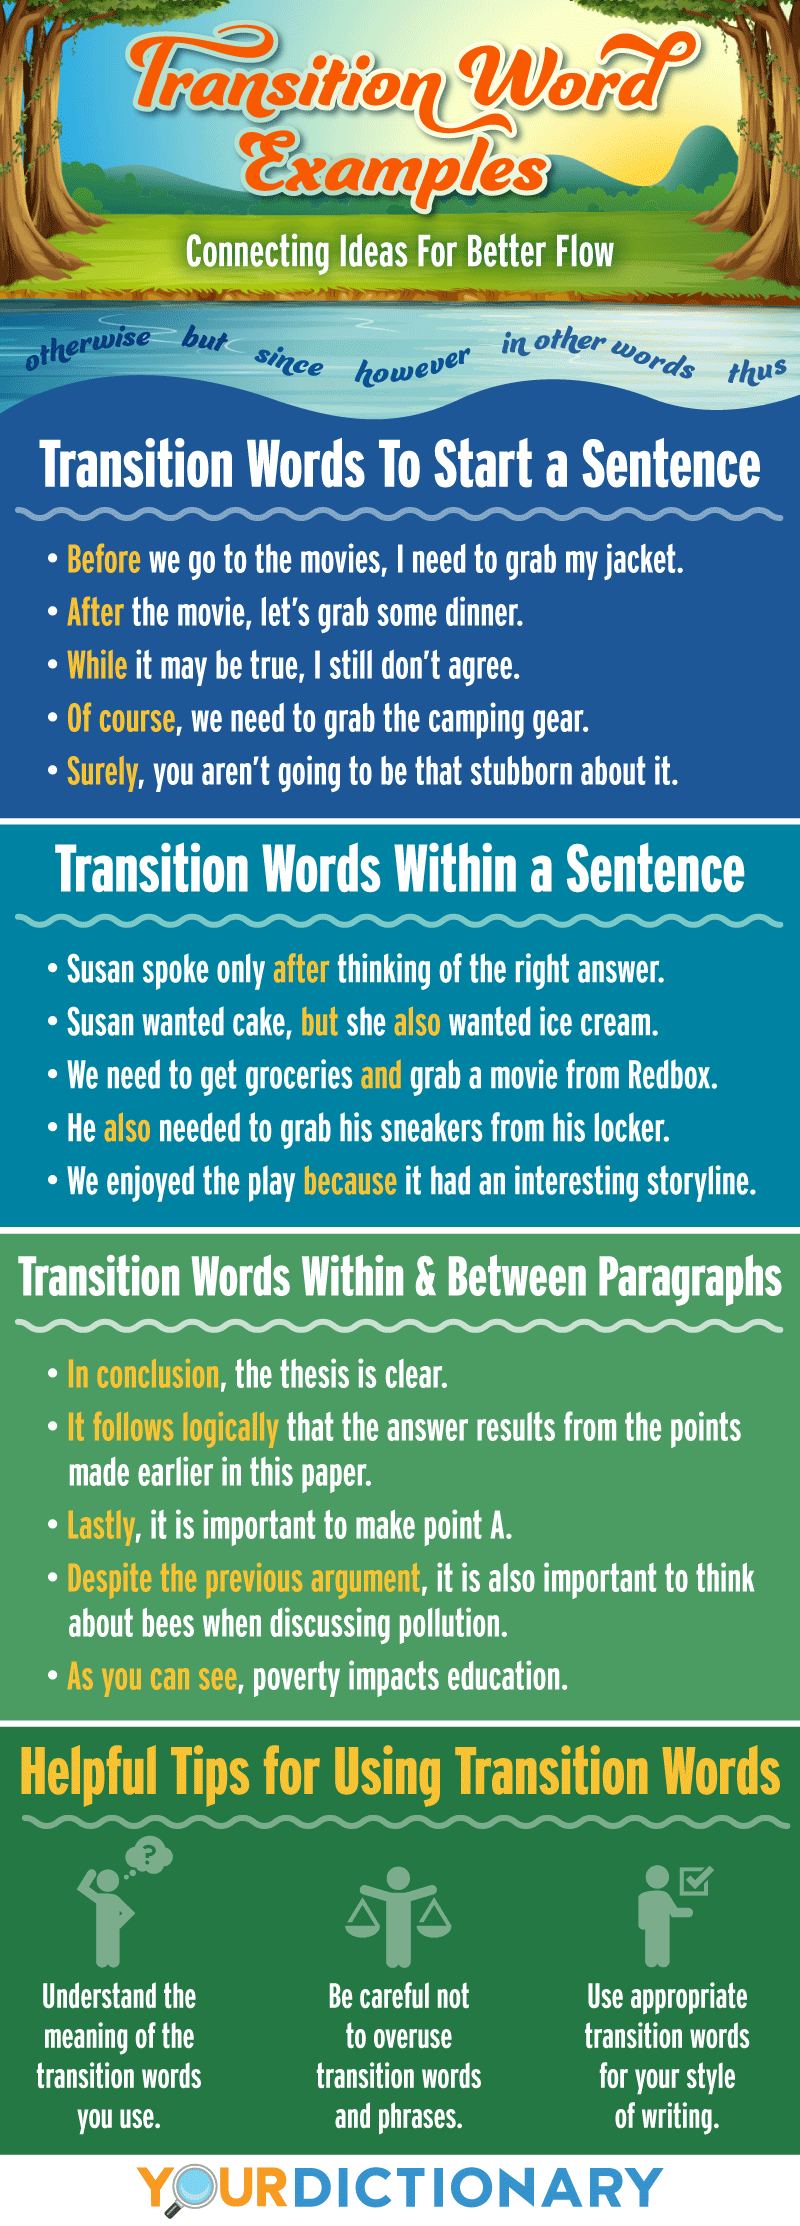 transition words examples infographic